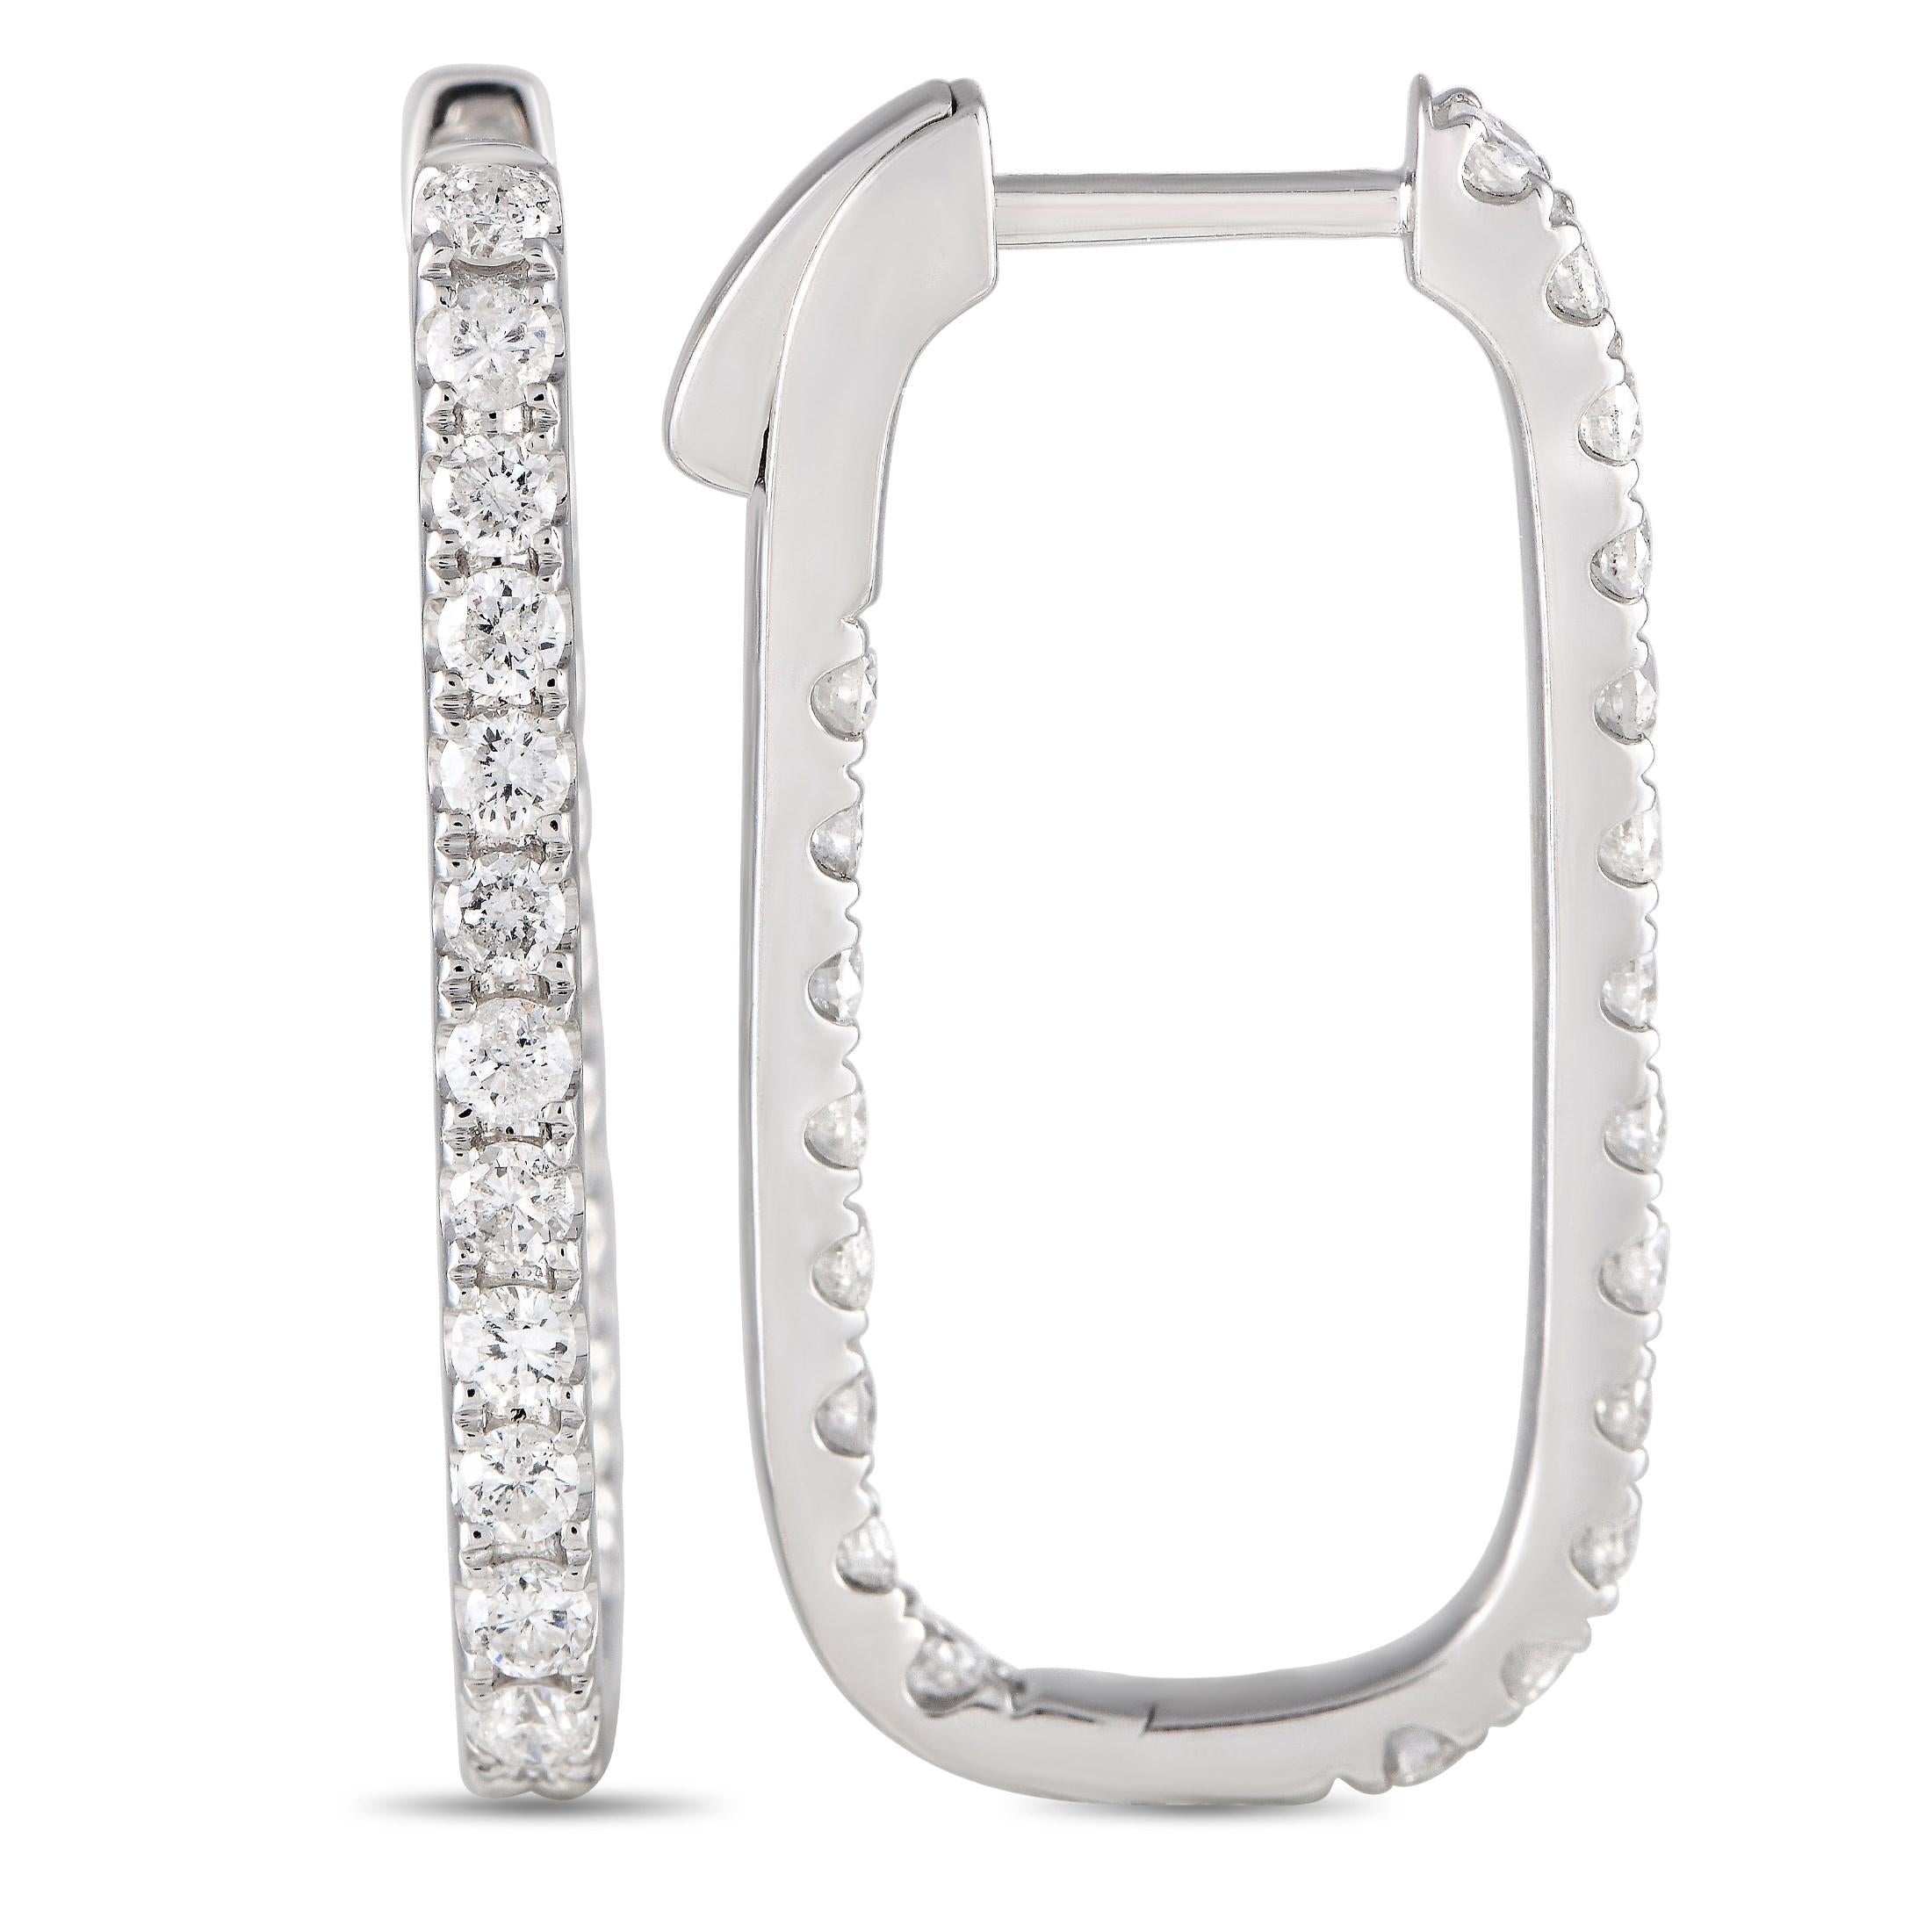 These impressive earrings offer a fresh, elevated take on a classic hoop. The 14K White Gold setting measures 1.0 long by 0.50 wide and features a rectangular shape with curved edges. Diamonds with a total weight of 1.10 carats allow them to